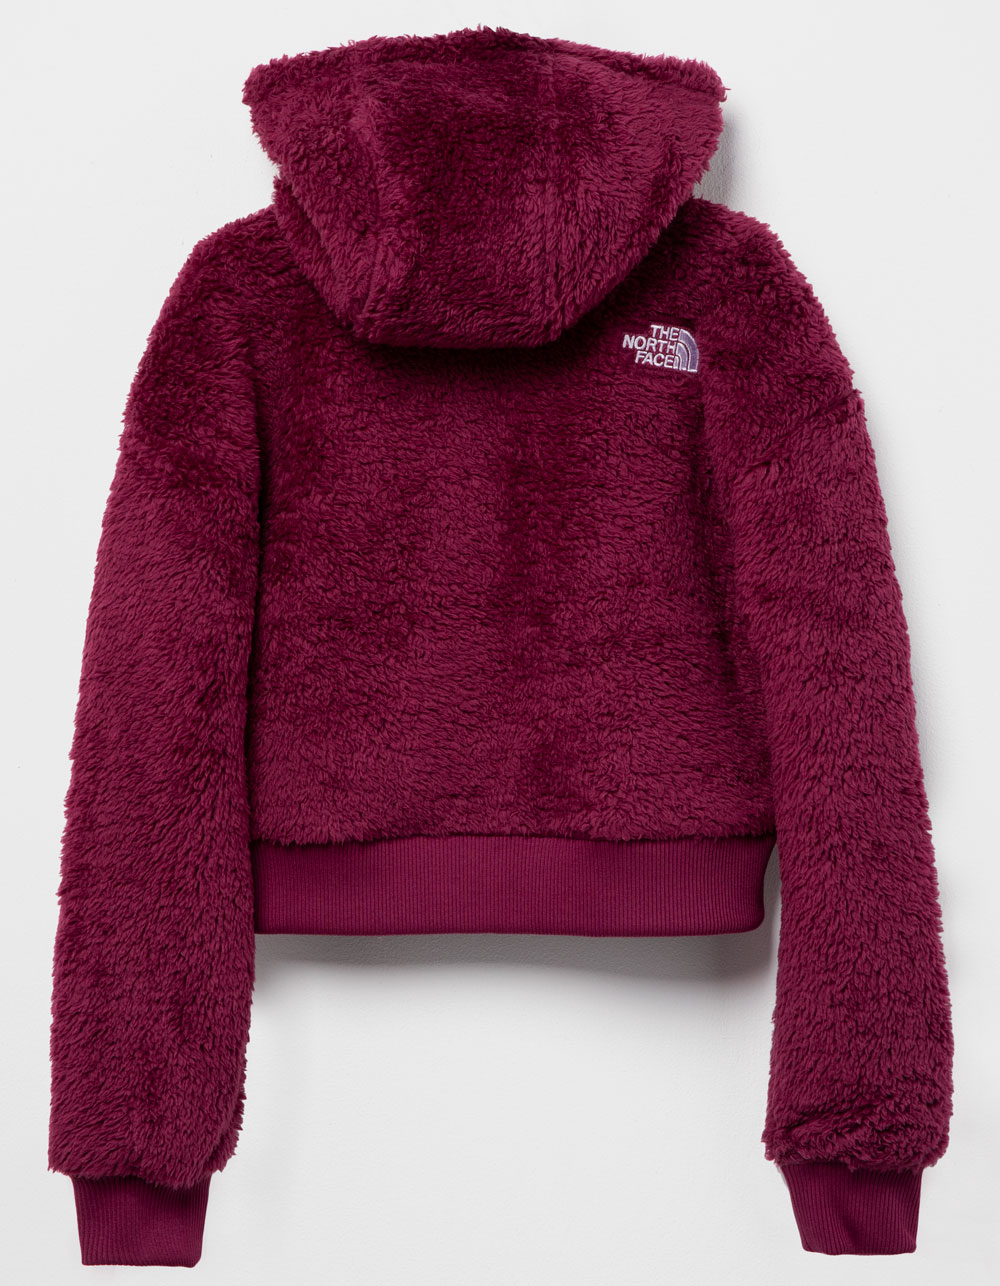 THE NORTH FACE Suave Oso Girls Zip Jacket - BURGUNDY | Tillys